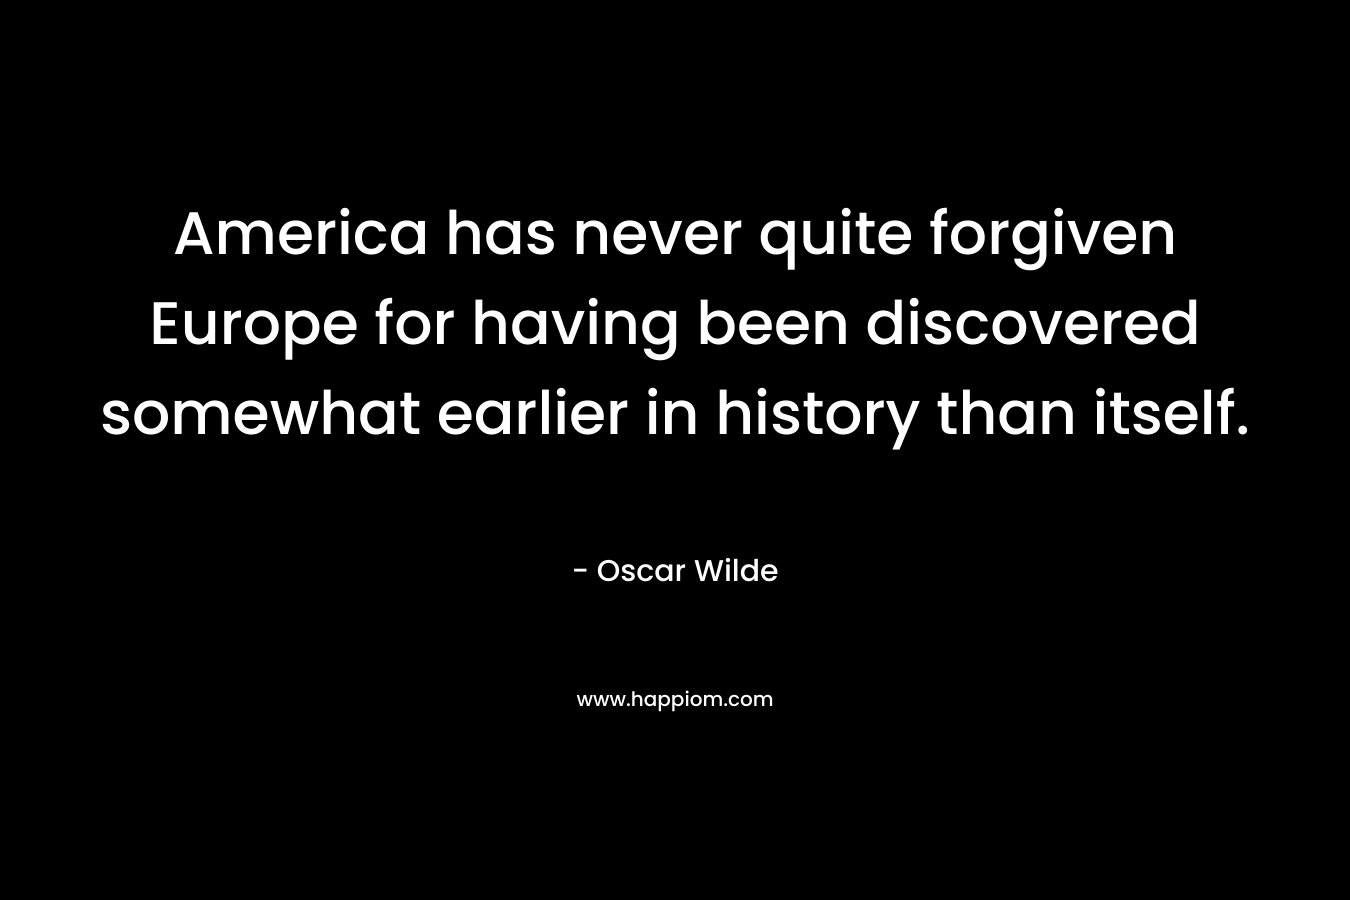 America has never quite forgiven Europe for having been discovered somewhat earlier in history than itself. – Oscar Wilde